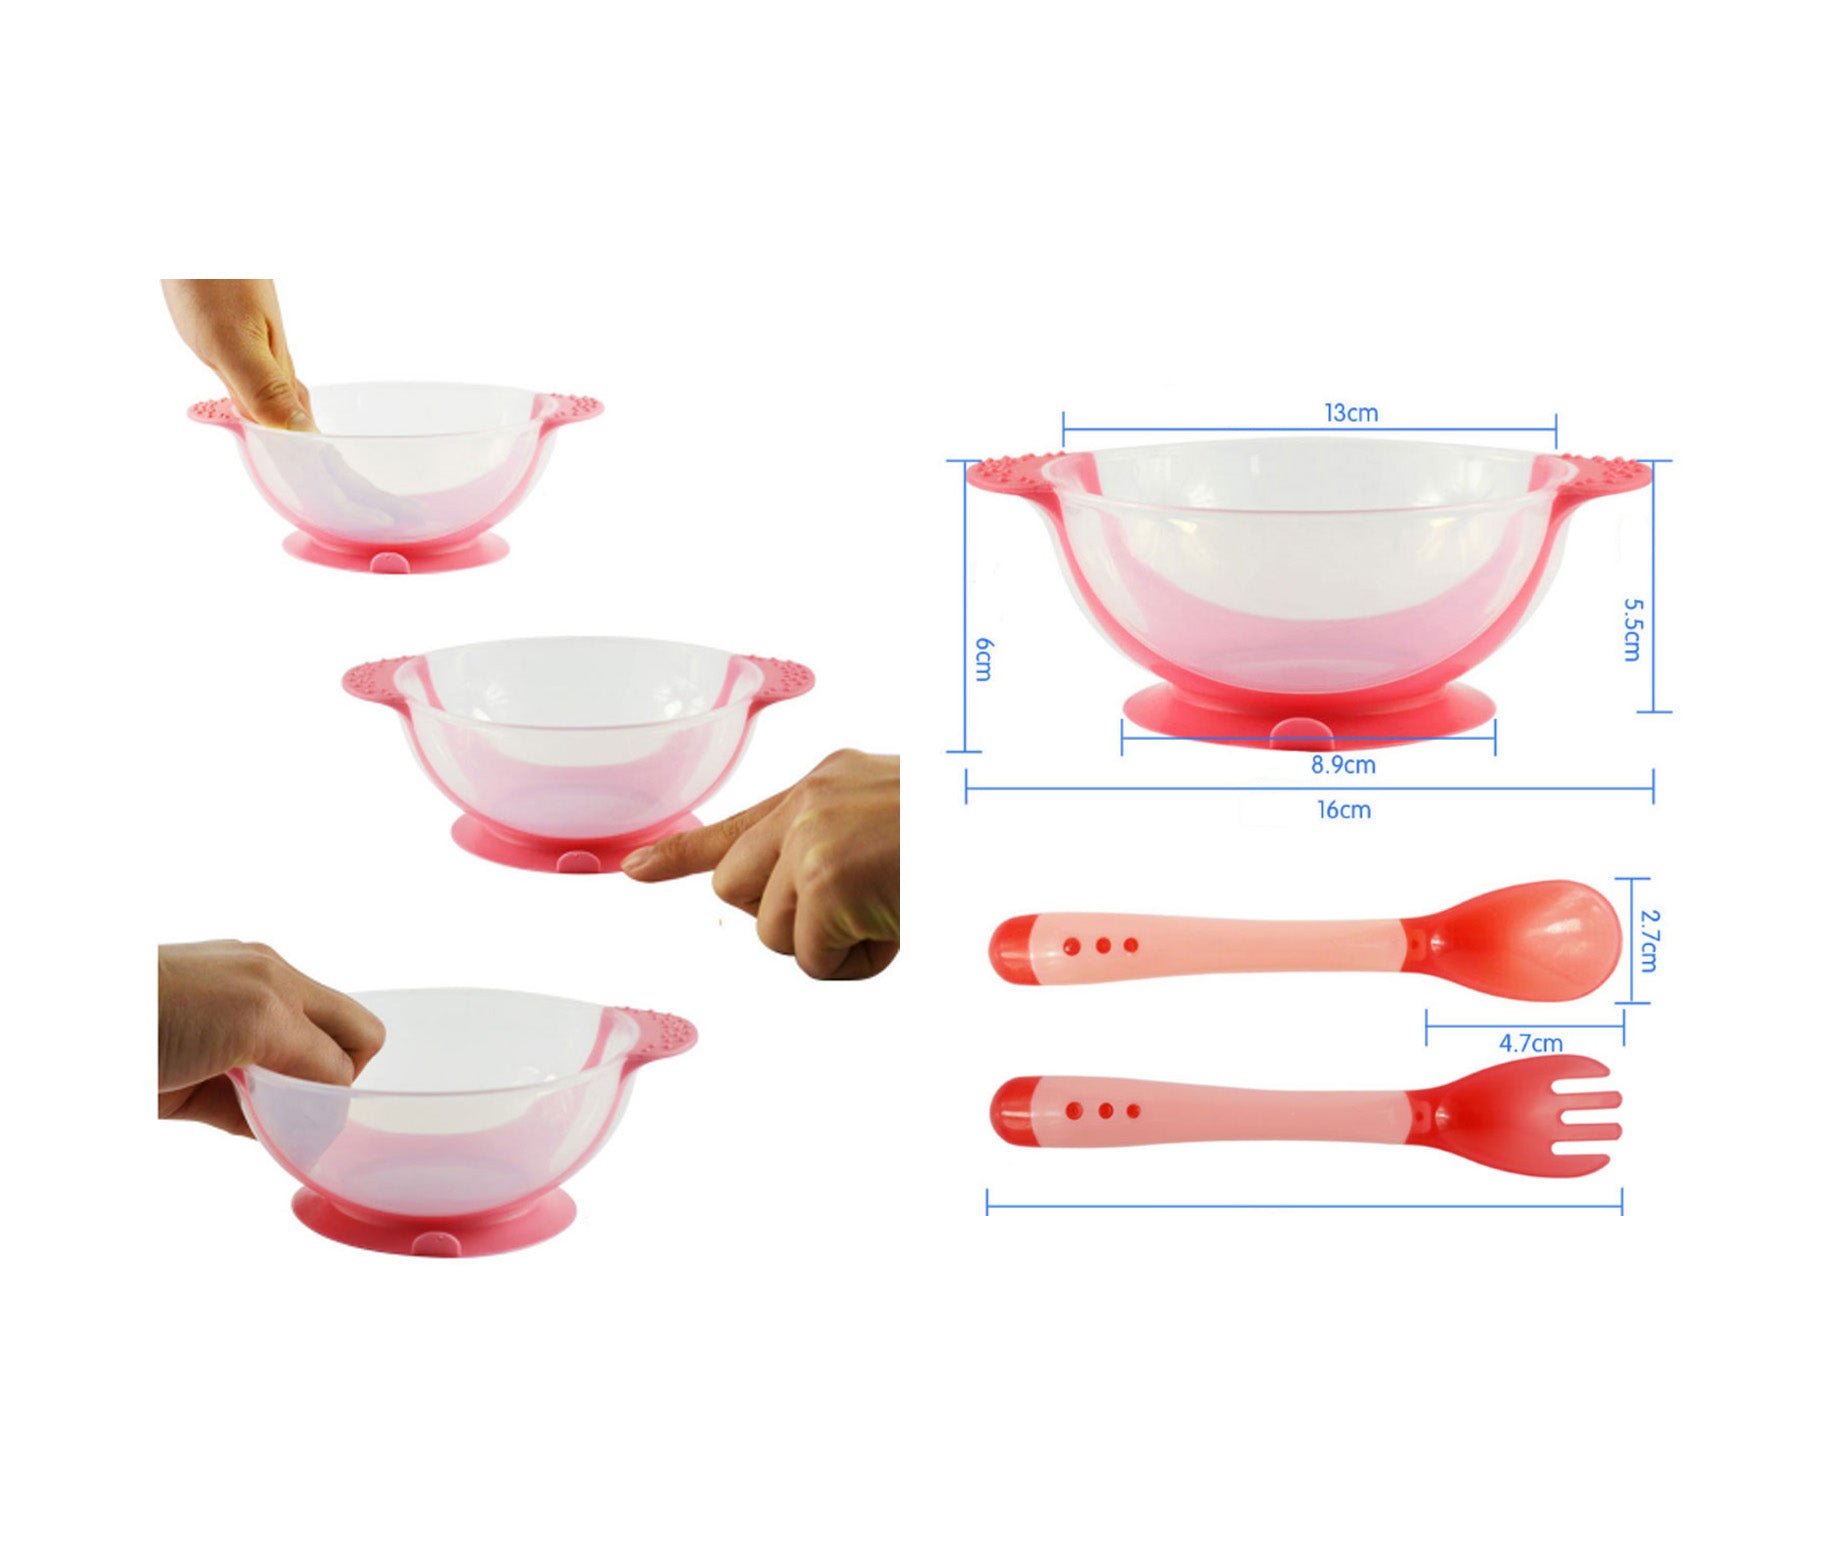 Baby Suction Bowl/ Feeding Bowl And Spoon Set, Pink Tableware